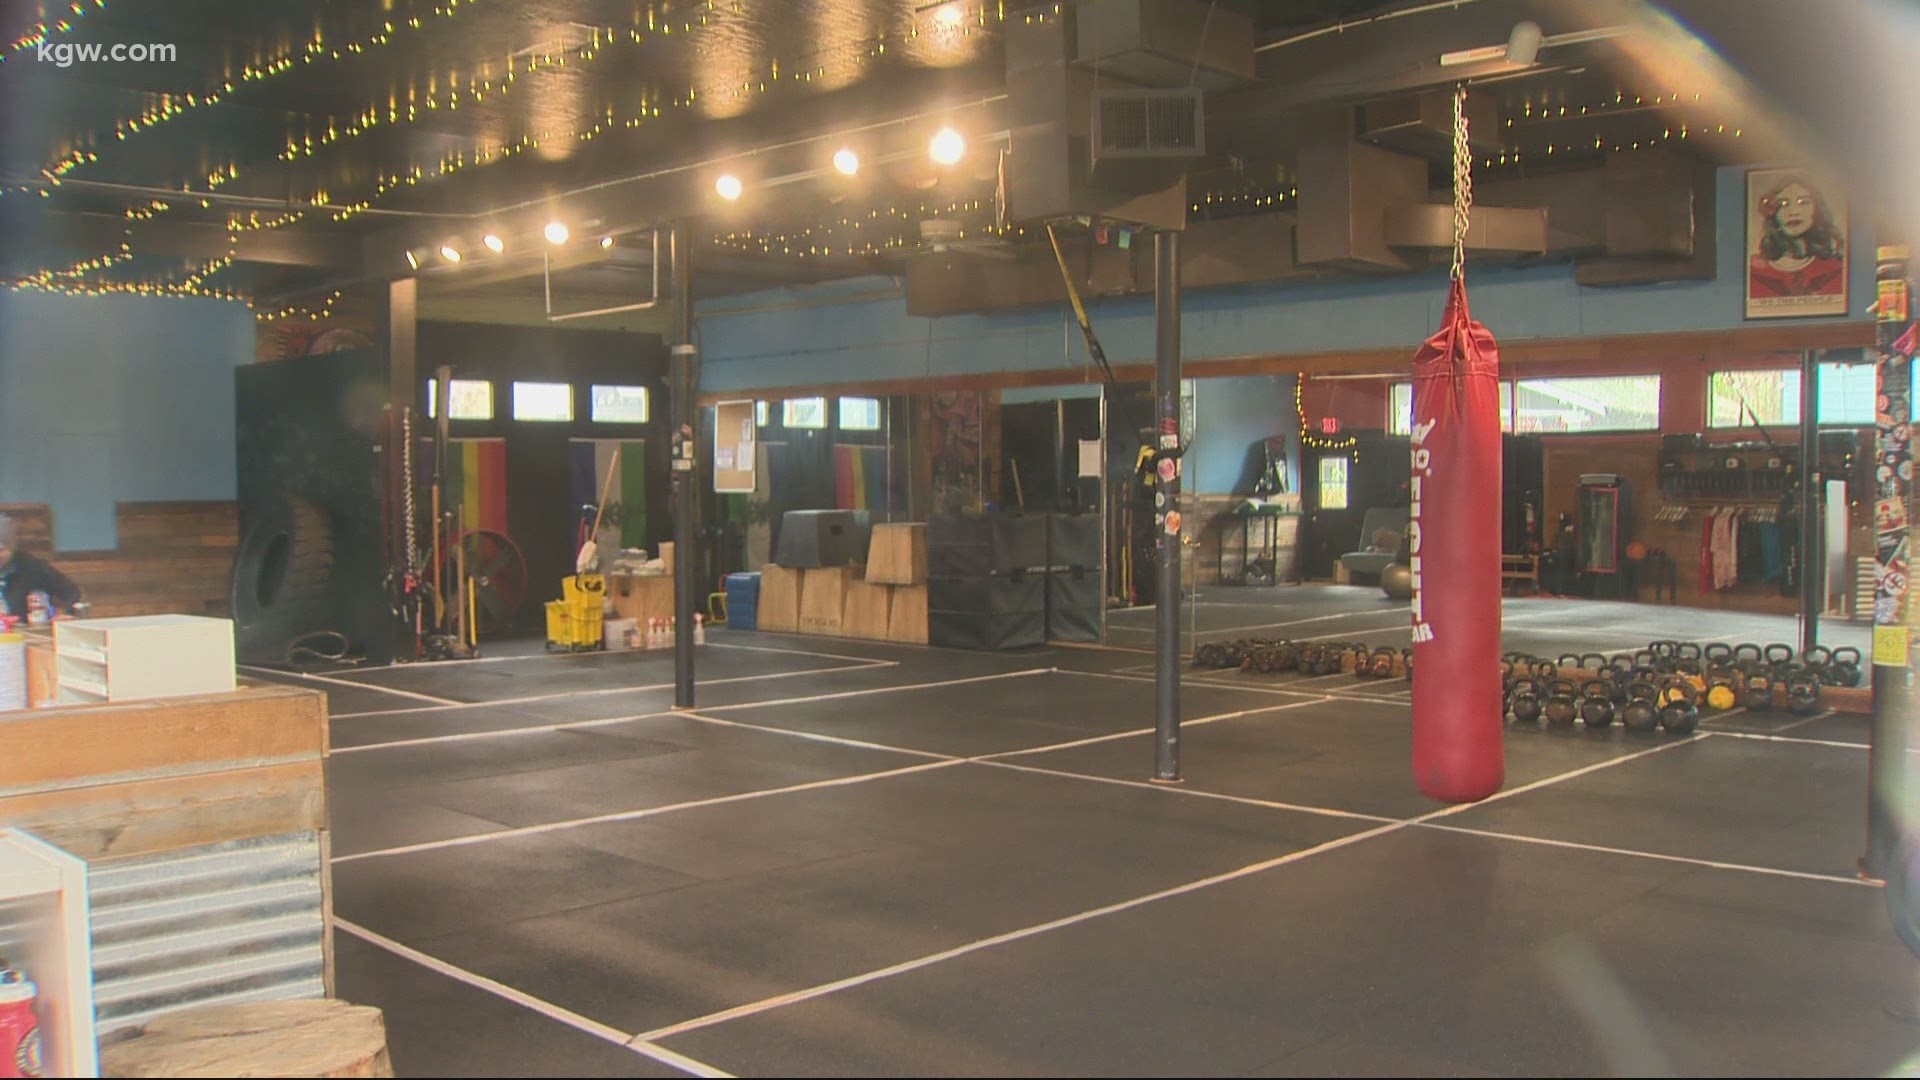 Local gym owners are concerned about their clients and the future of business.